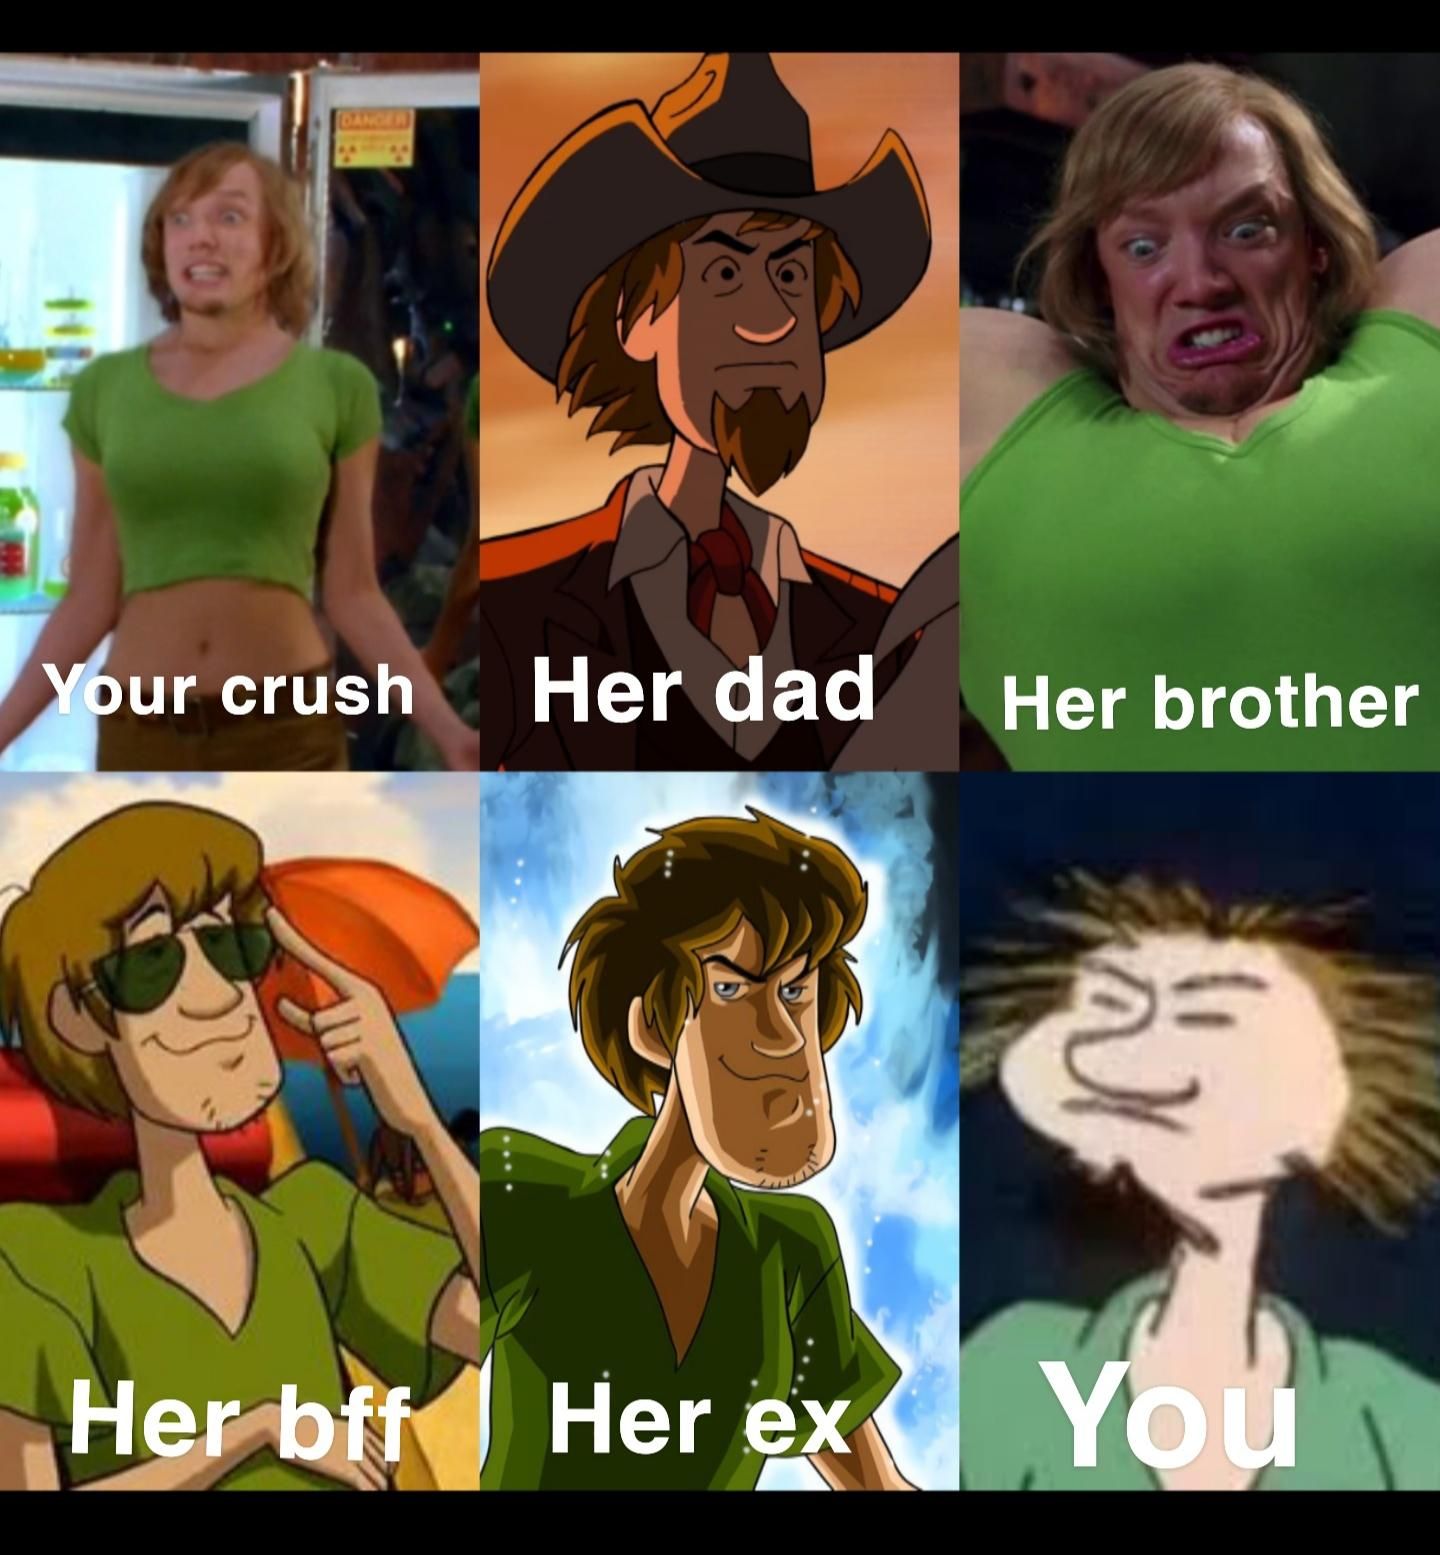 Shaggy is daddy material